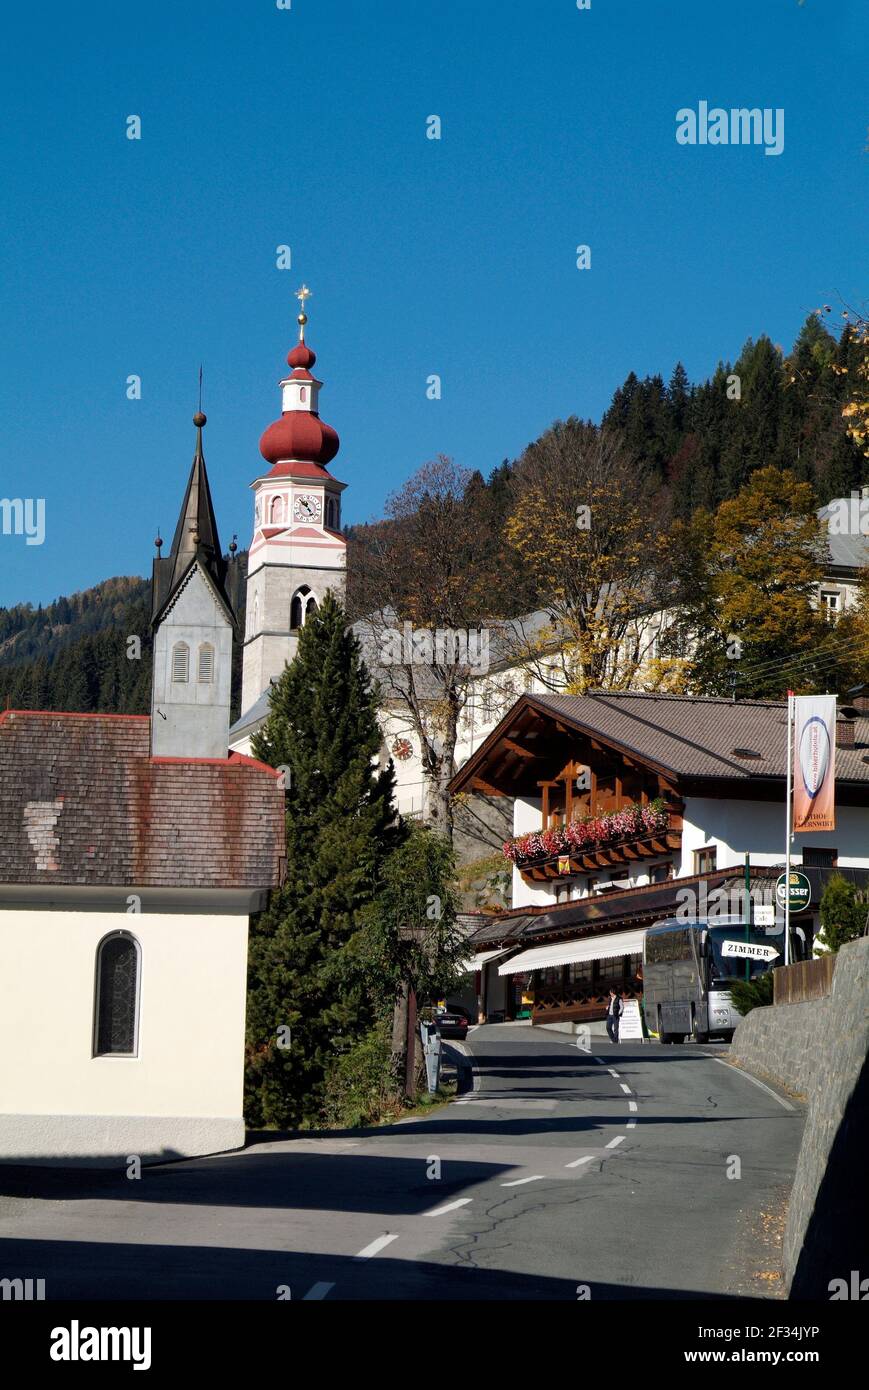 Maria Luggau, Austria - October 13, 2007: Unidentified people, hotel and pilgrimage church in Carinthia Stock Photo